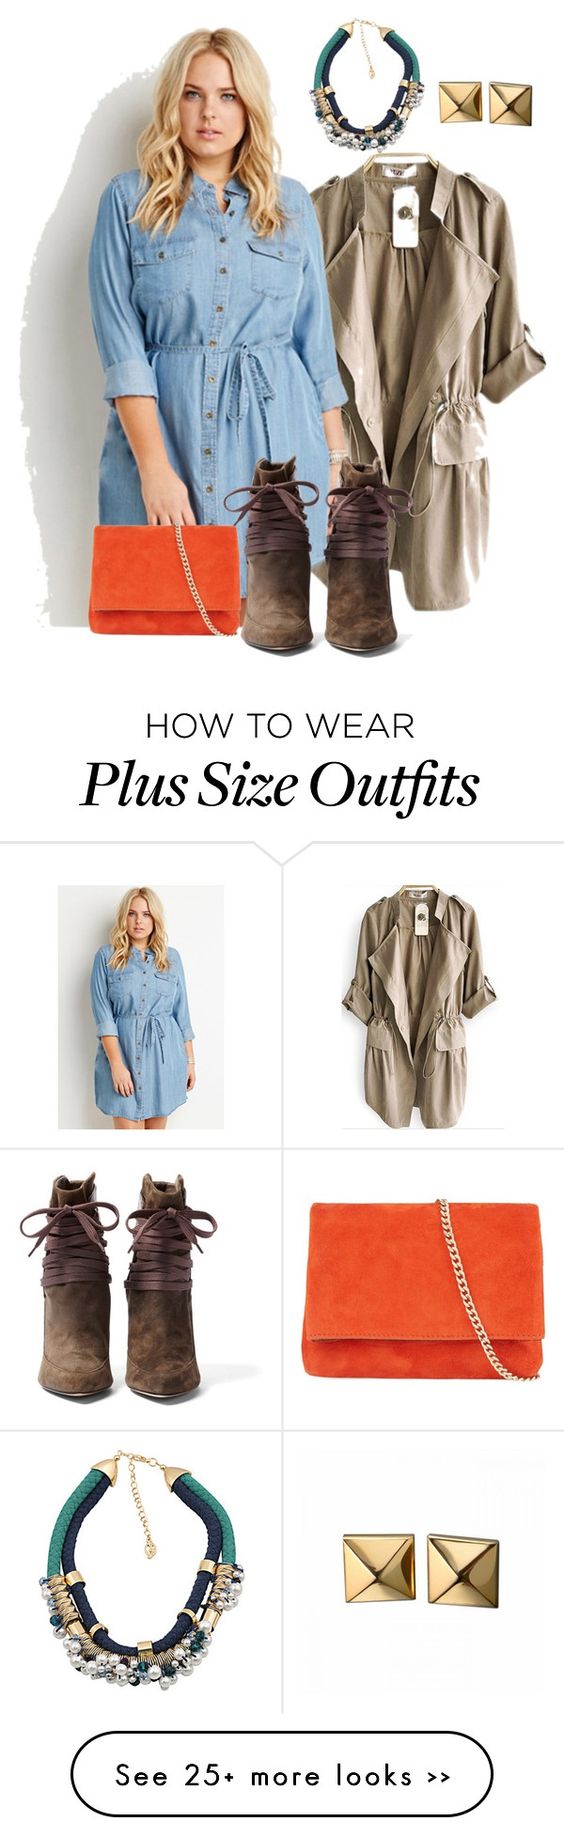 5-plus-size-spring-dresses-for-work-styling-4